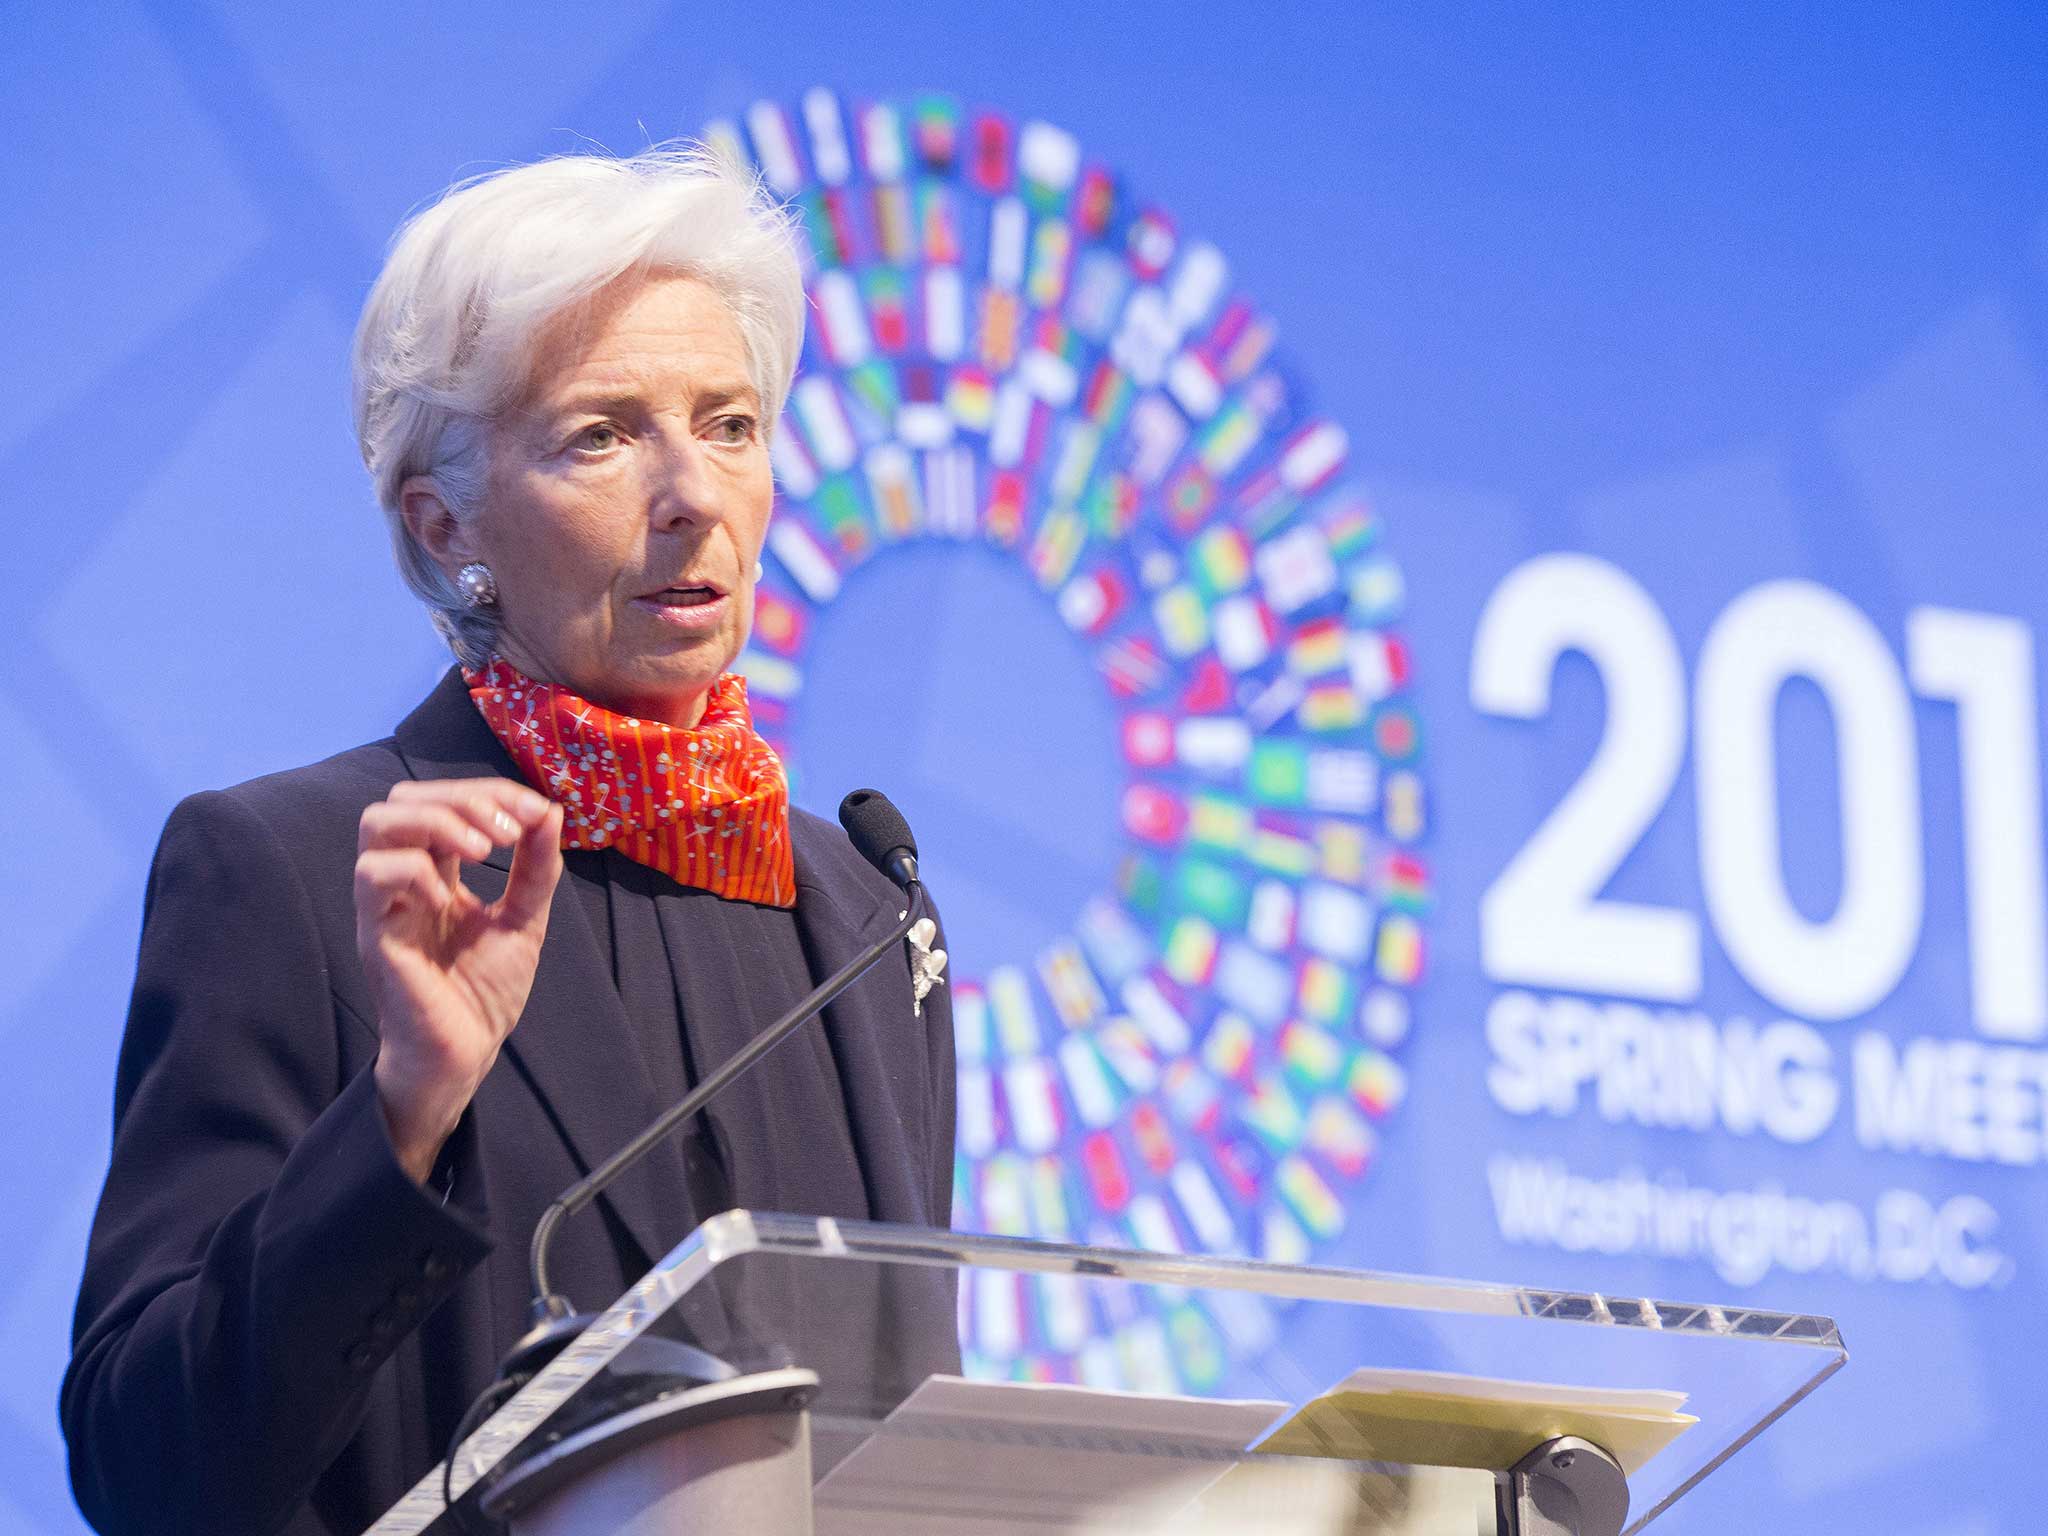 International Monetary Fund Managing Director Christine Lagarde delivers introductory remarks at the "Financial Inclusion: Macroeconomic and Regulatory Challenges" seminar at the IMF Headquarter in Washington